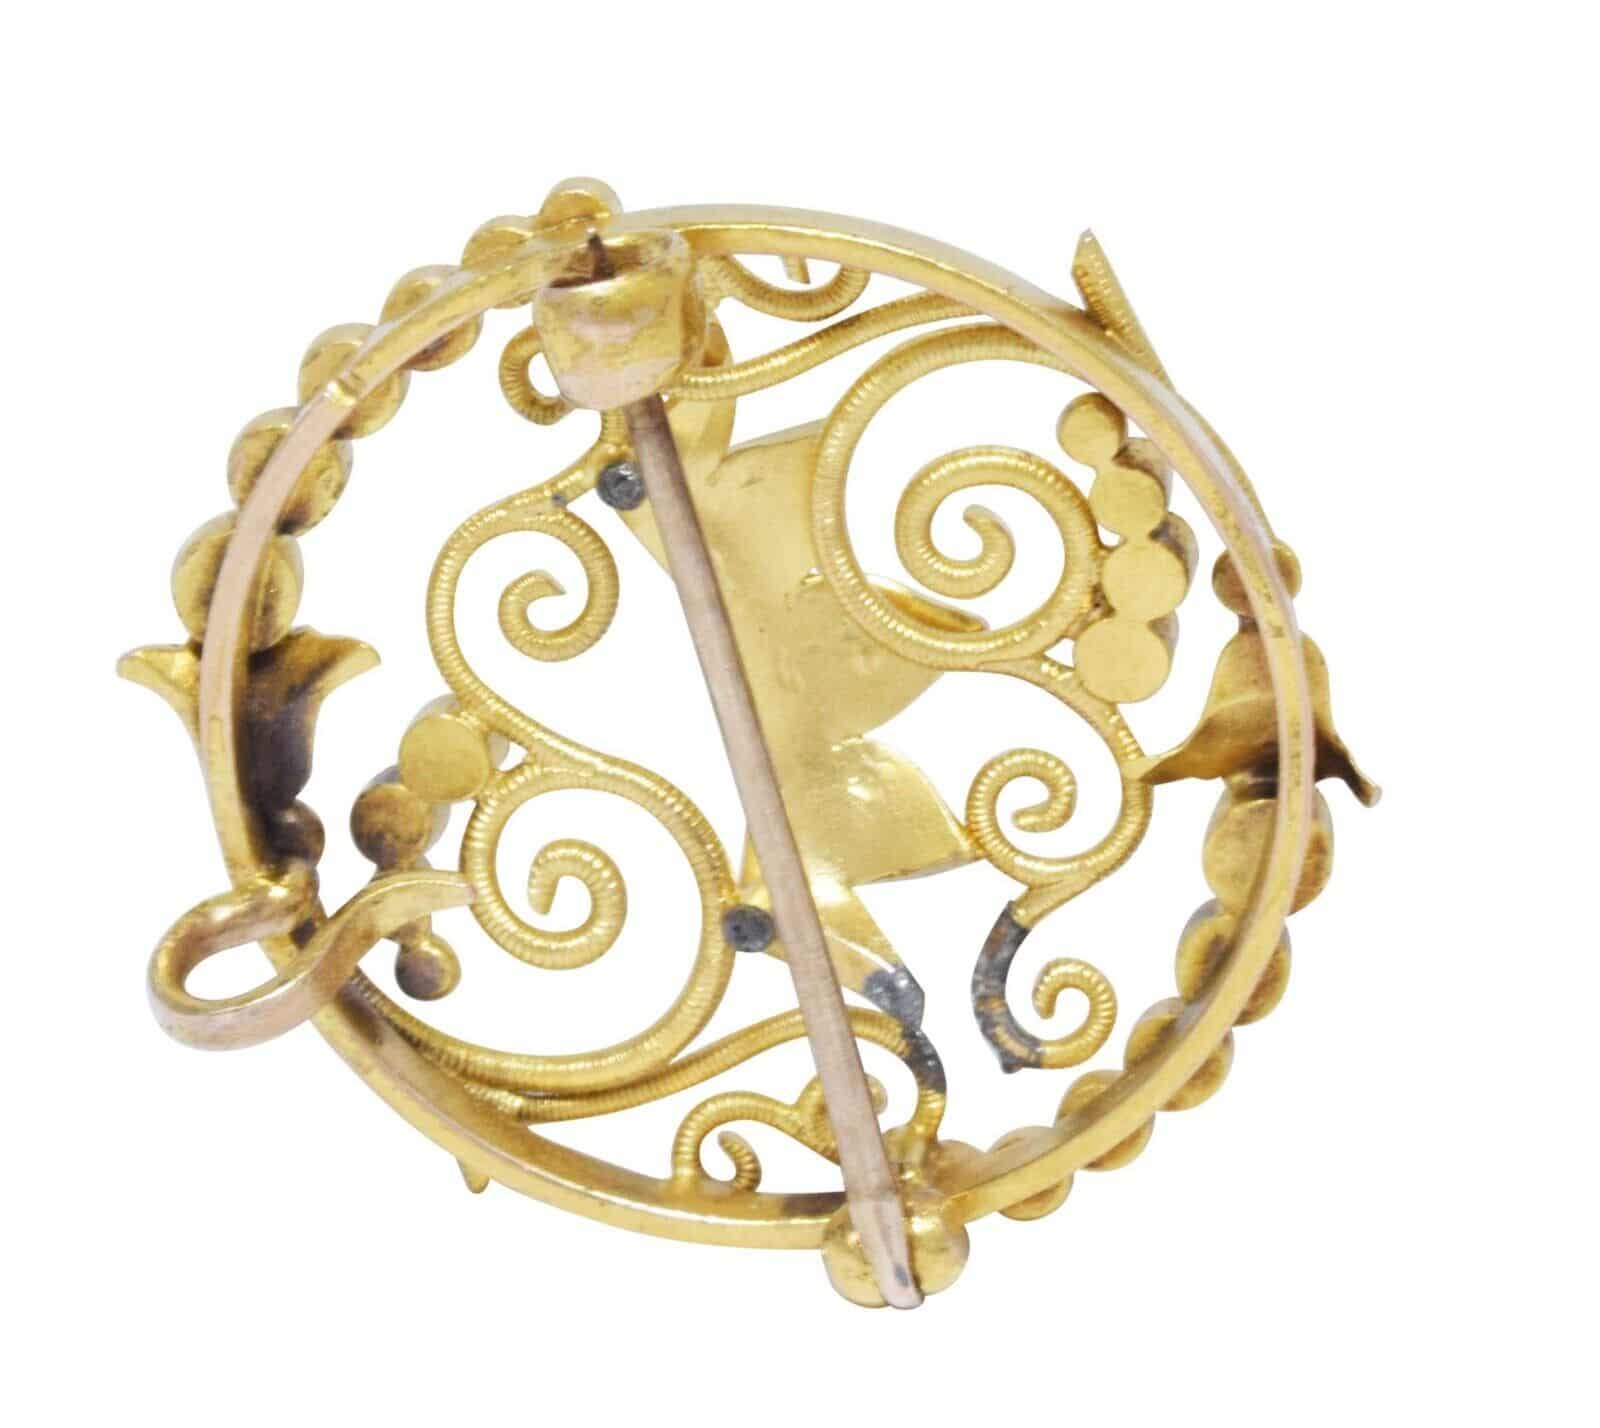 18K Yellow Gold Seed Pearl Brooch Crown Design